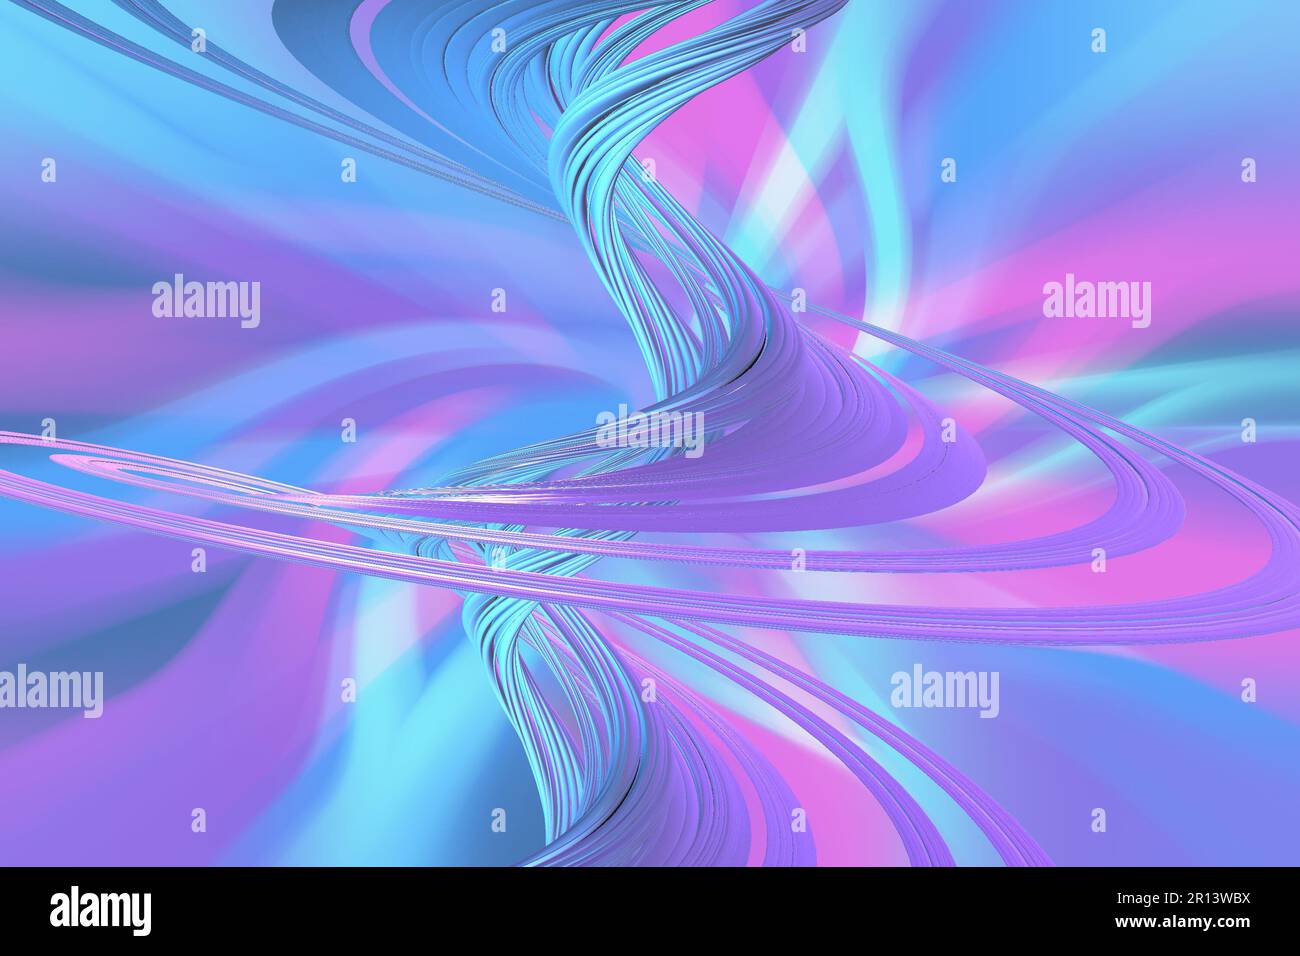 Colorful digital art, illustration, purple, blue background, wallpaper, abstract. Space theme, outer space, world, worldy Stock Photo